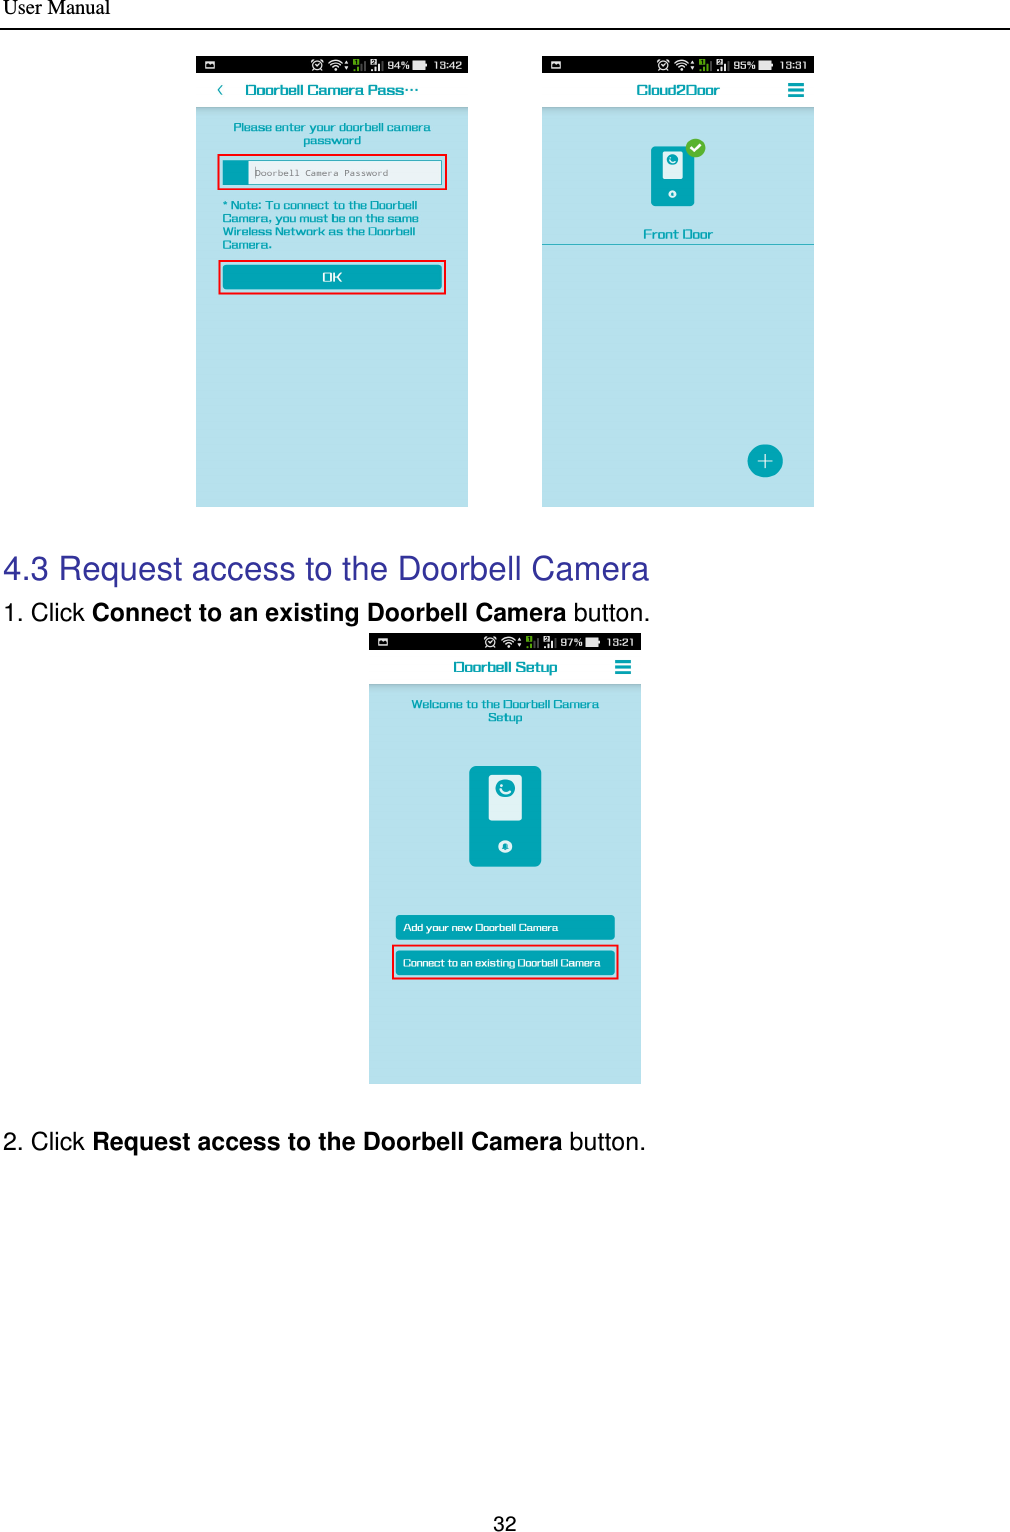 User Manual 32           4.3 Request access to the Doorbell Camera 1. Click Connect to an existing Doorbell Camera button.   2. Click Request access to the Doorbell Camera button. 